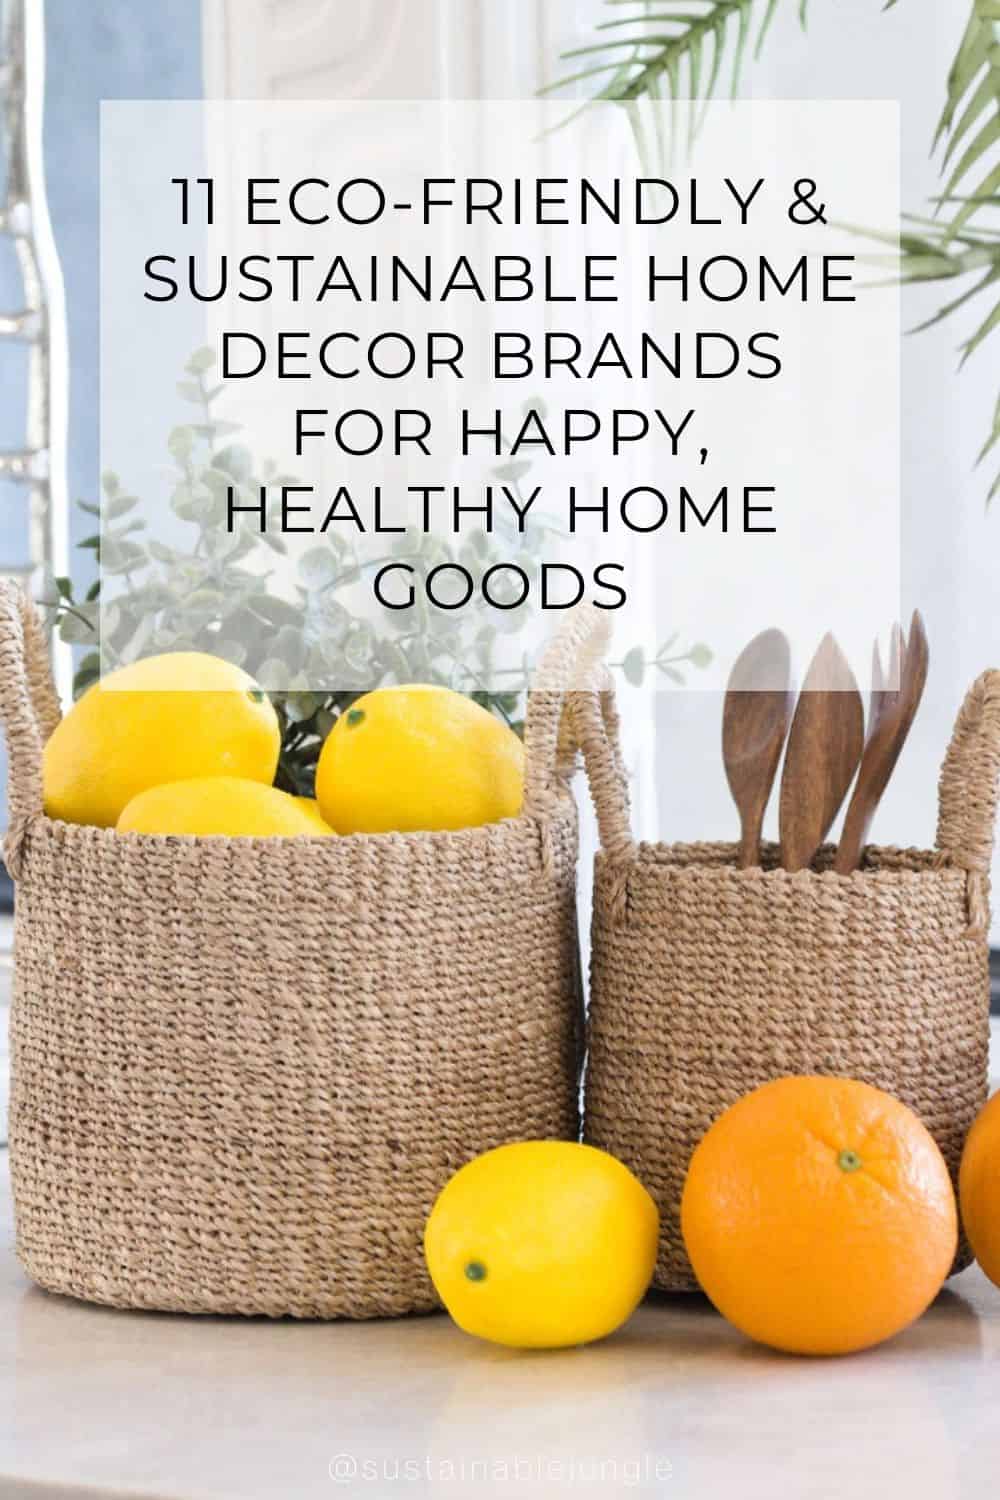 11 Eco-Friendly & Sustainable Home Decor Brands For Happy, Healthy Home Goods Image by LIKHÂ #sustainablehomedecor #sustainablehomedecorbrands #sustainablehomegoods #affordablesustainablehomegoods #ecofriendlysustainablehomedecor #sustainablejungle